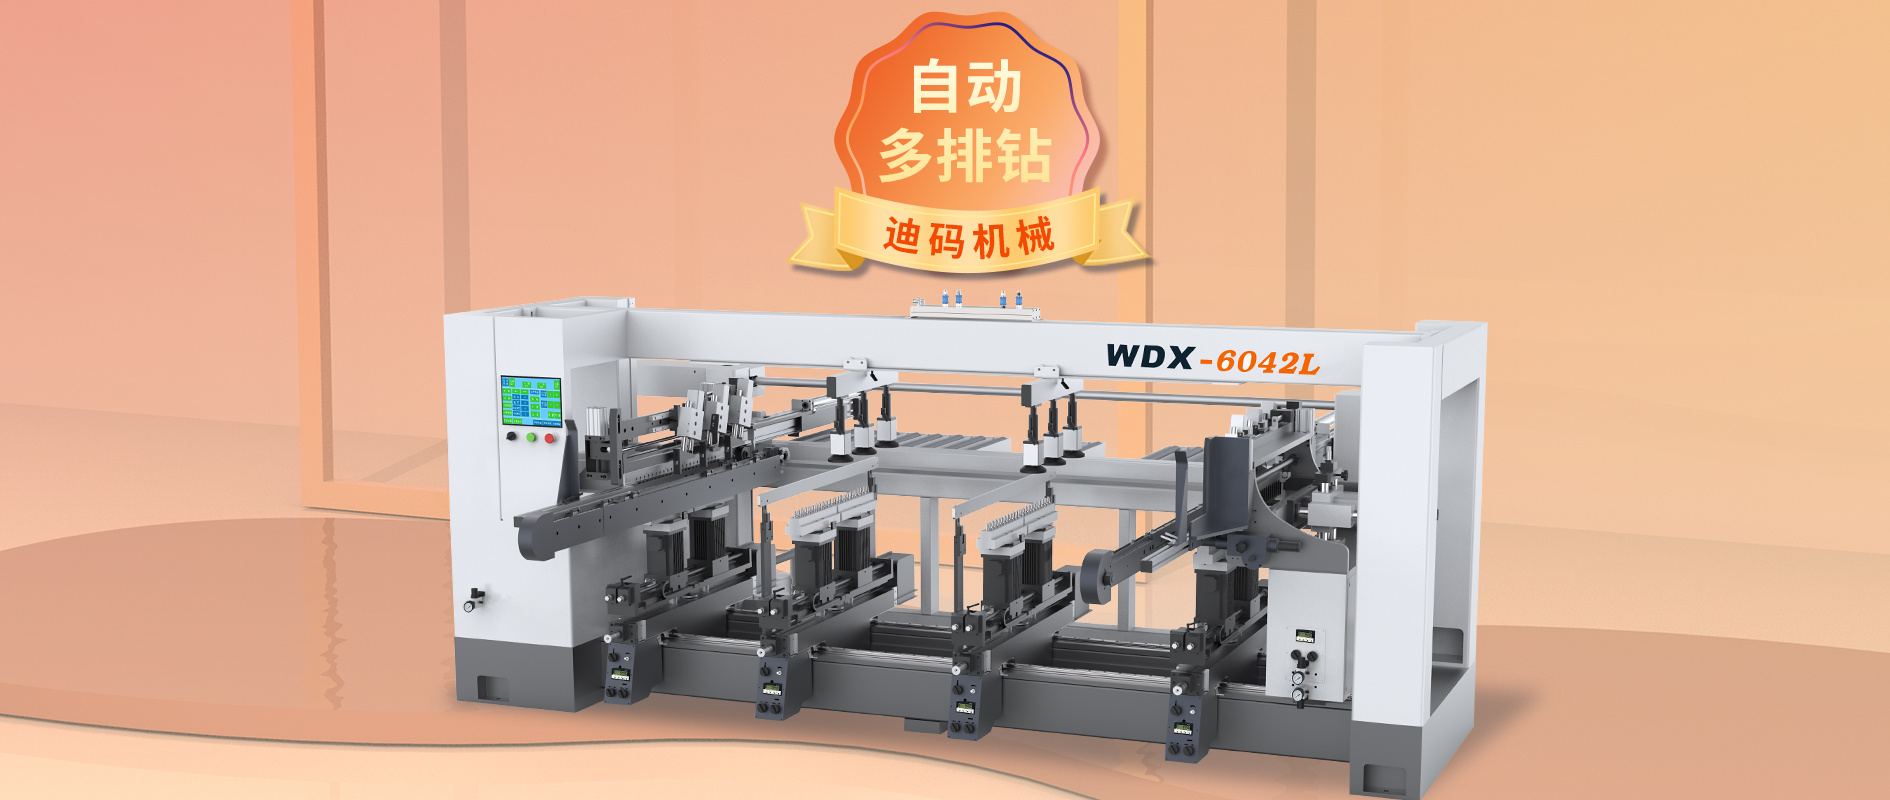 【WDX-6042L】Fast and automatic multi-row drilling, automatic material receiving, efficient and labor-saving!